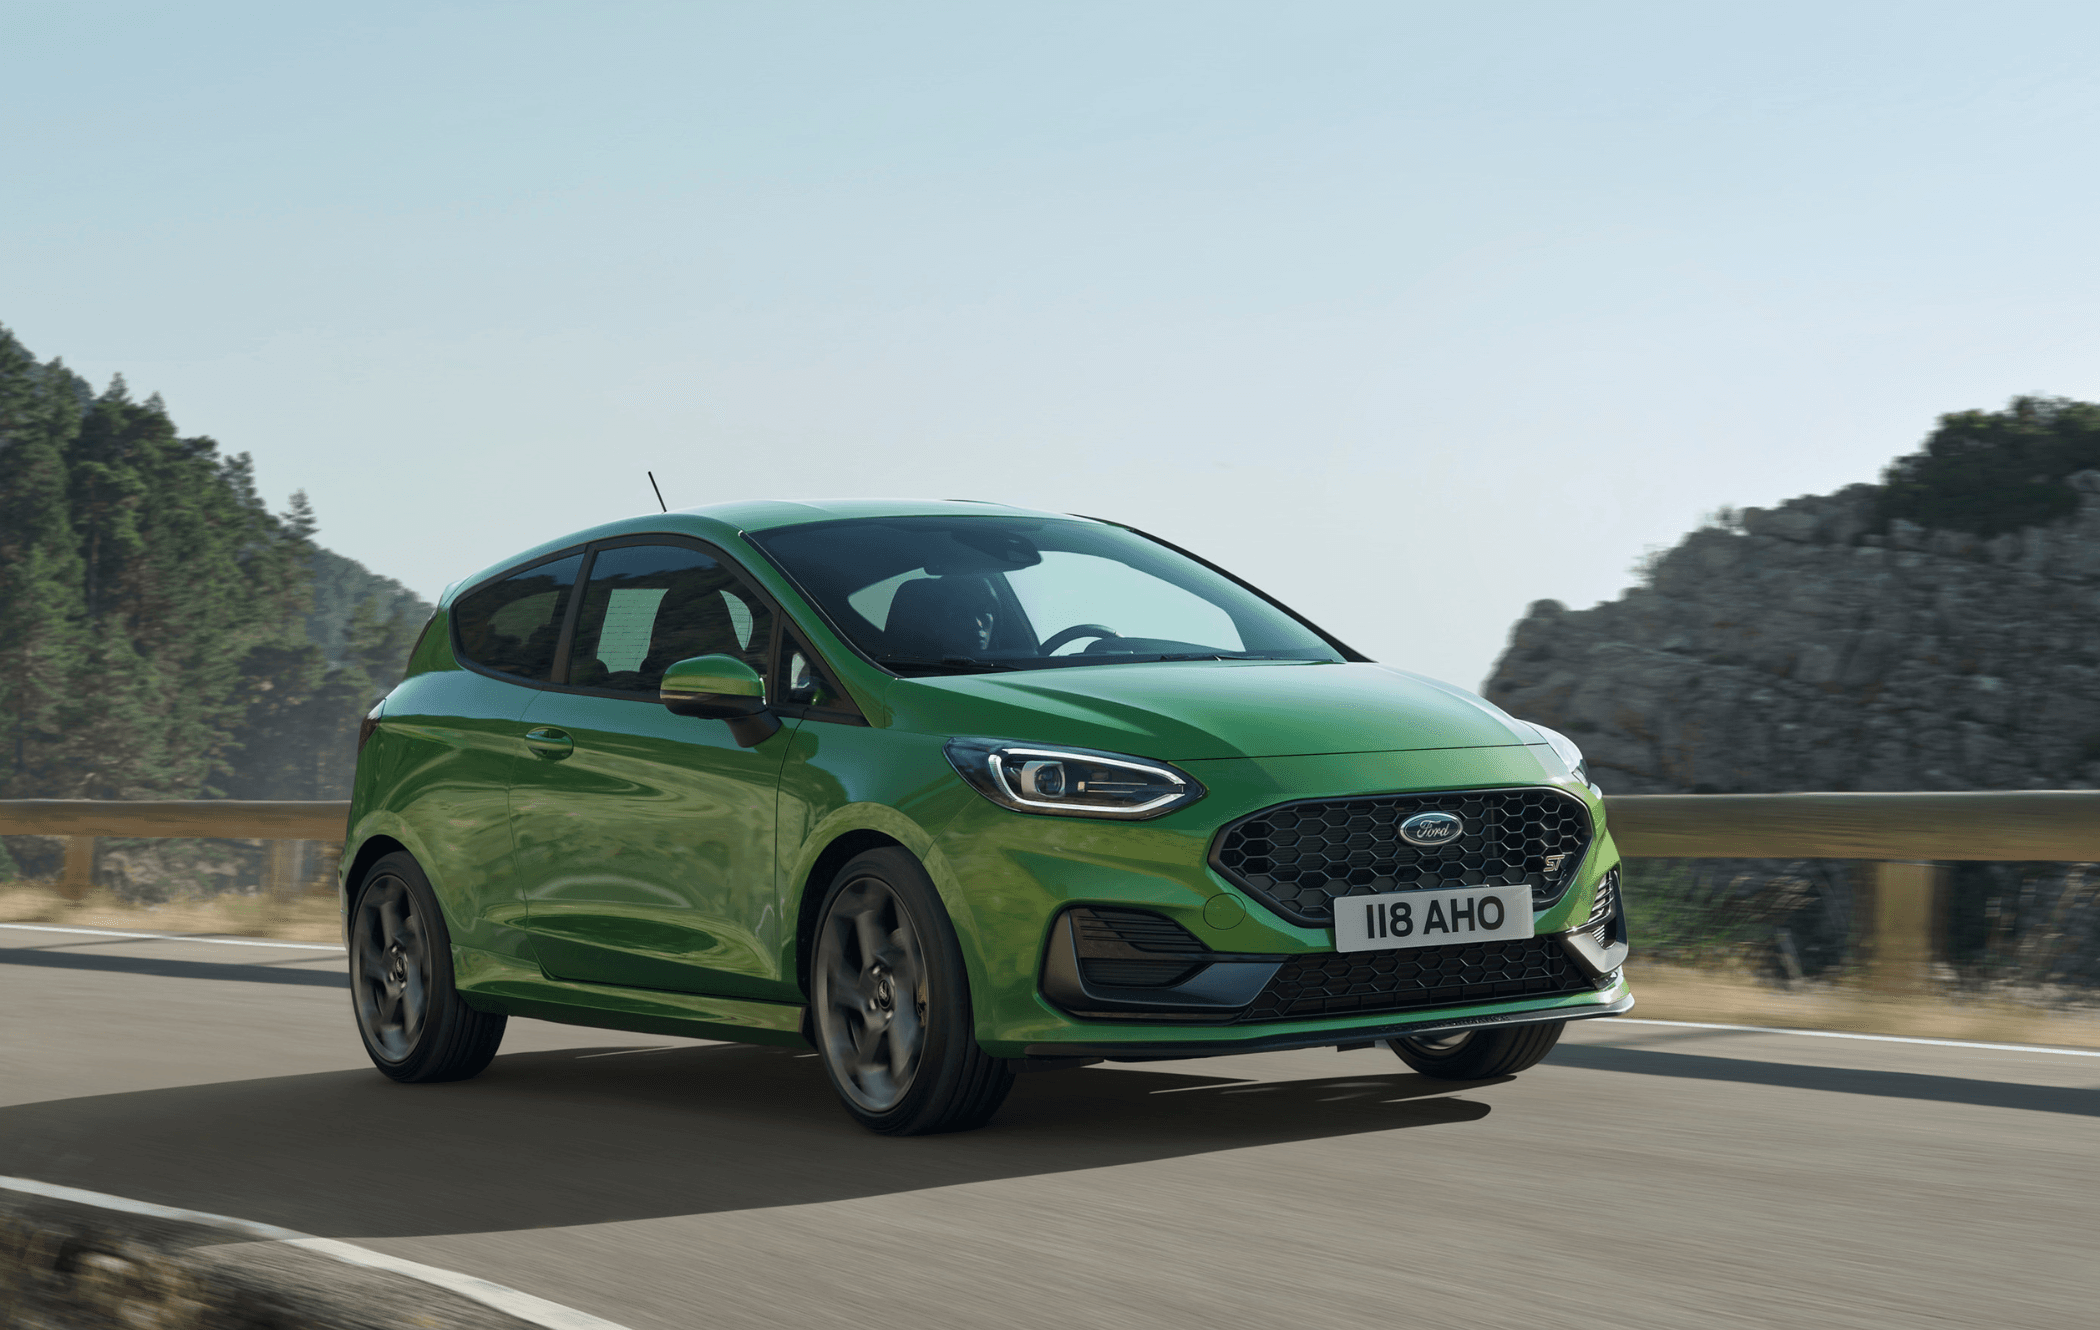 Facelifted Ford Fiesta ST in green driving on road